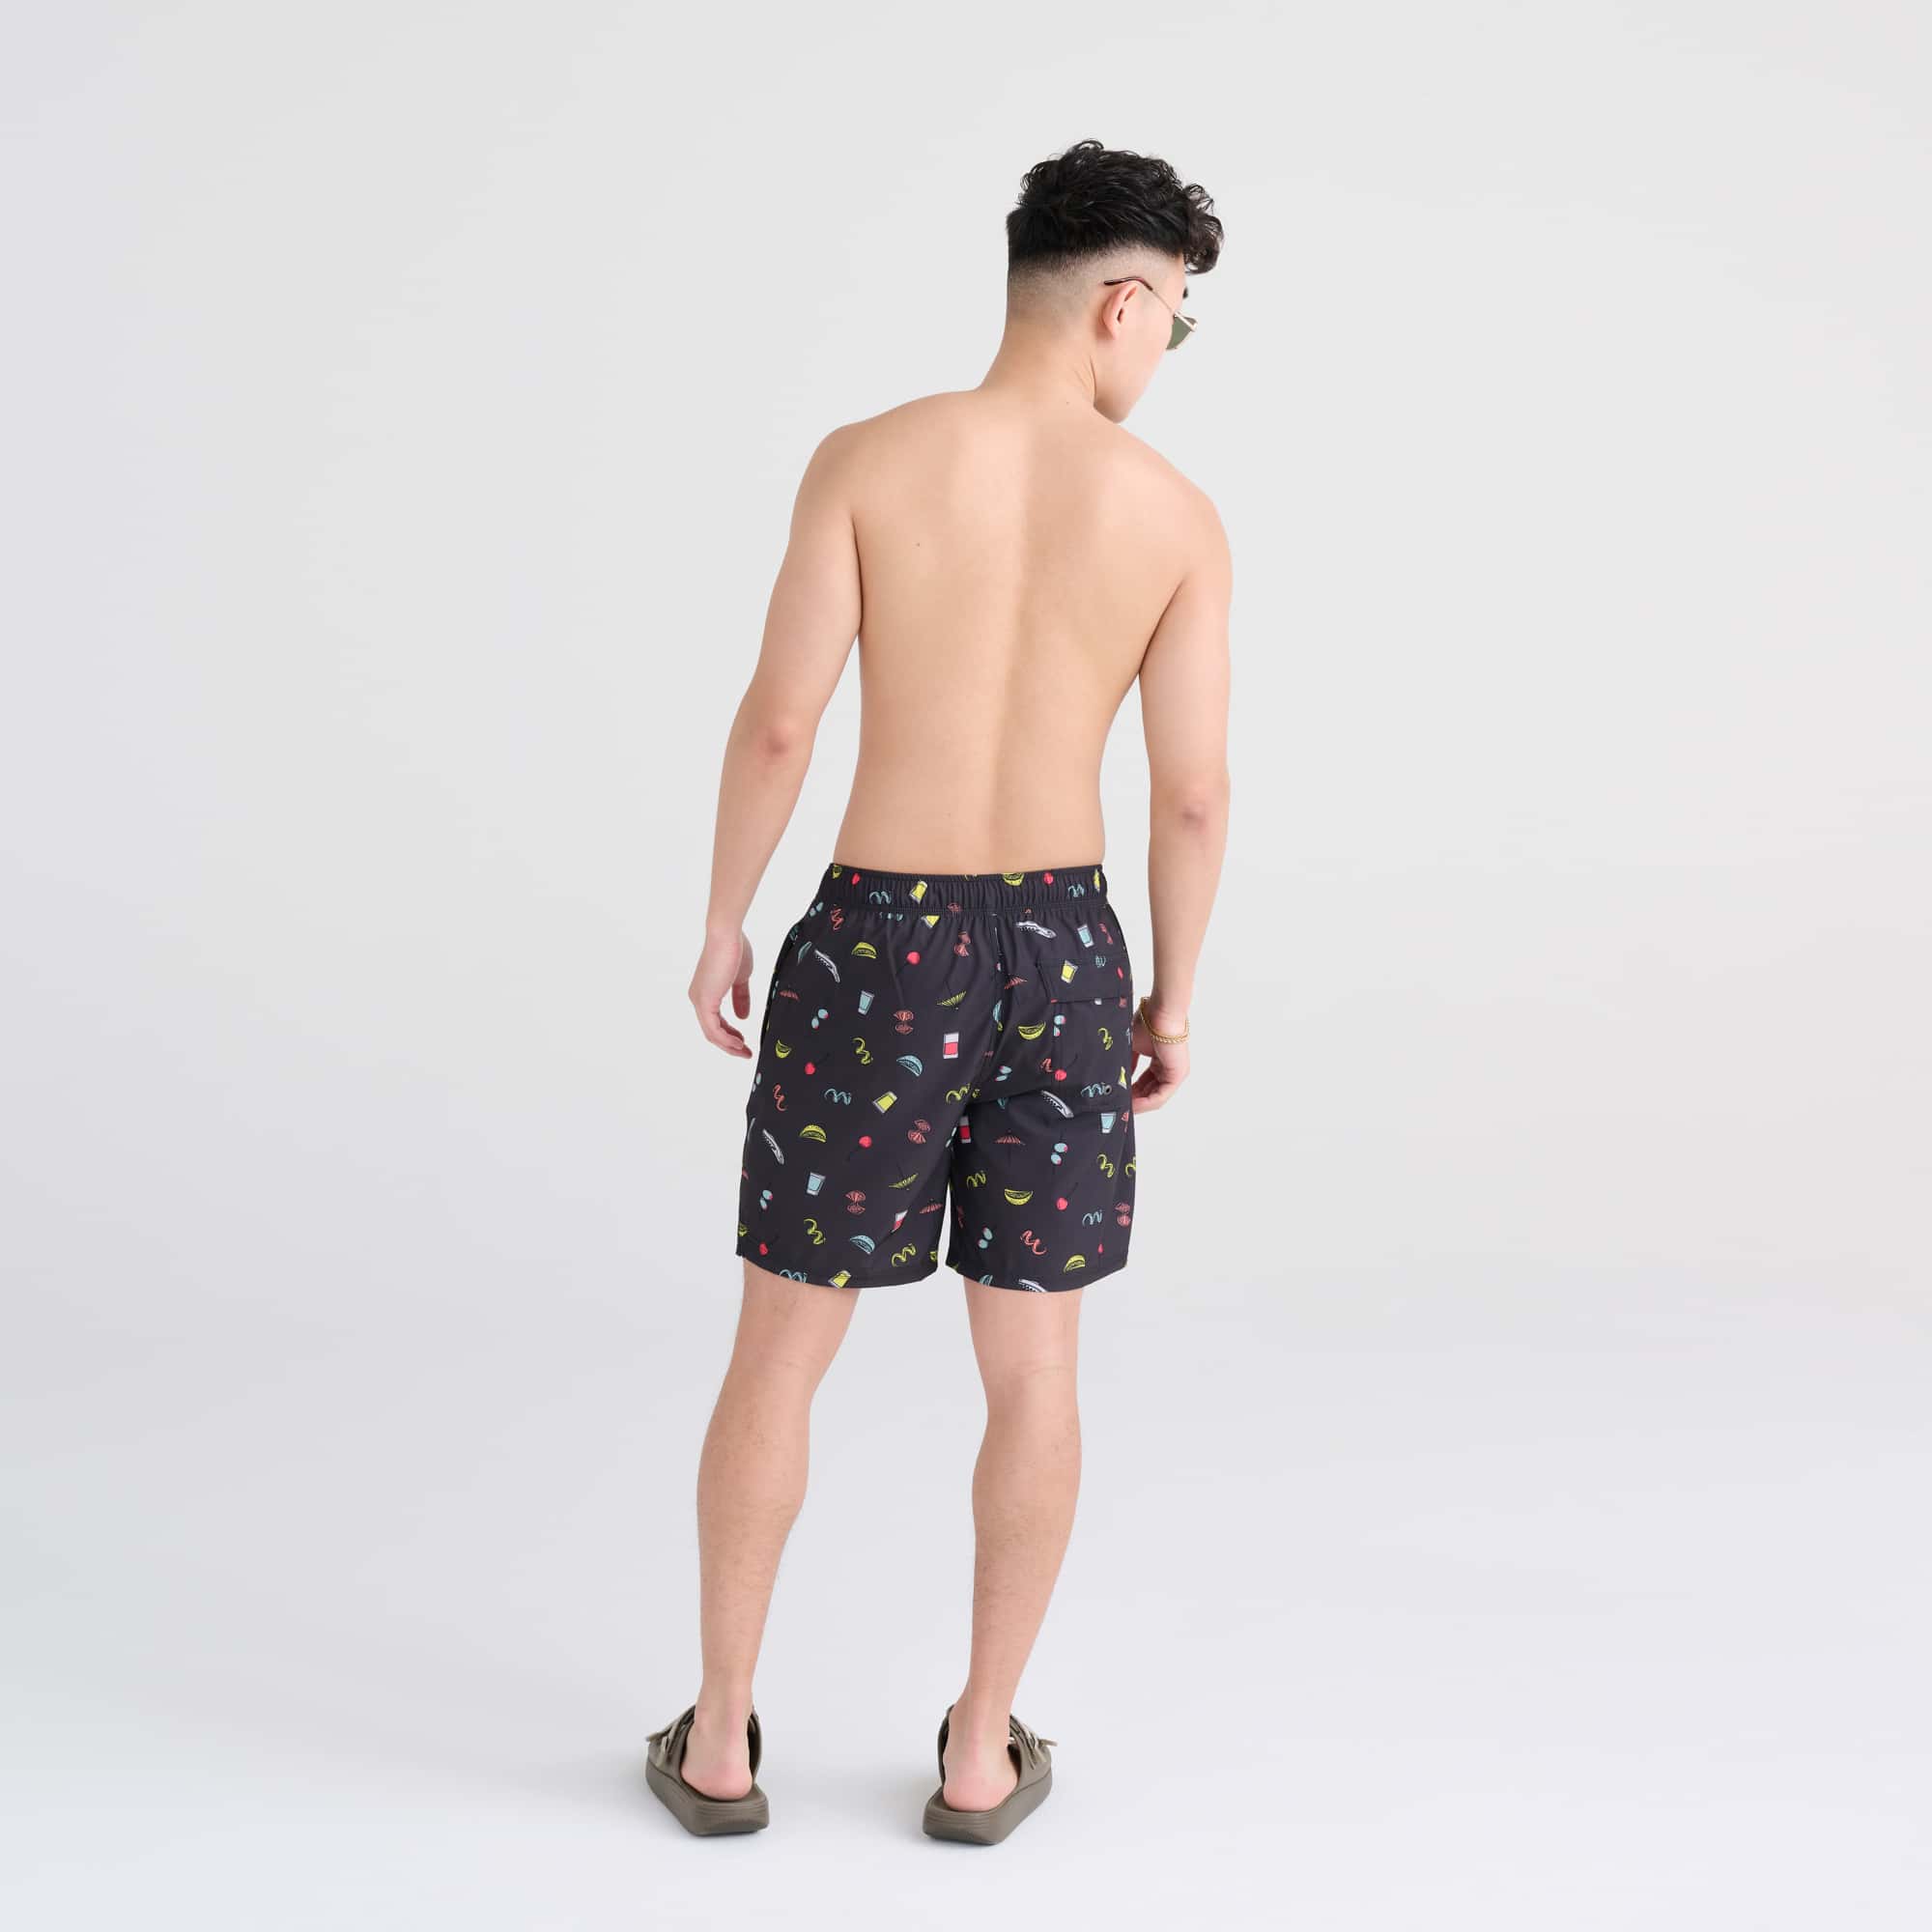 Back - Model wearing Oh Buoy 2N1 Swim Trunk 7" in Twists and Shots-Faded Blk